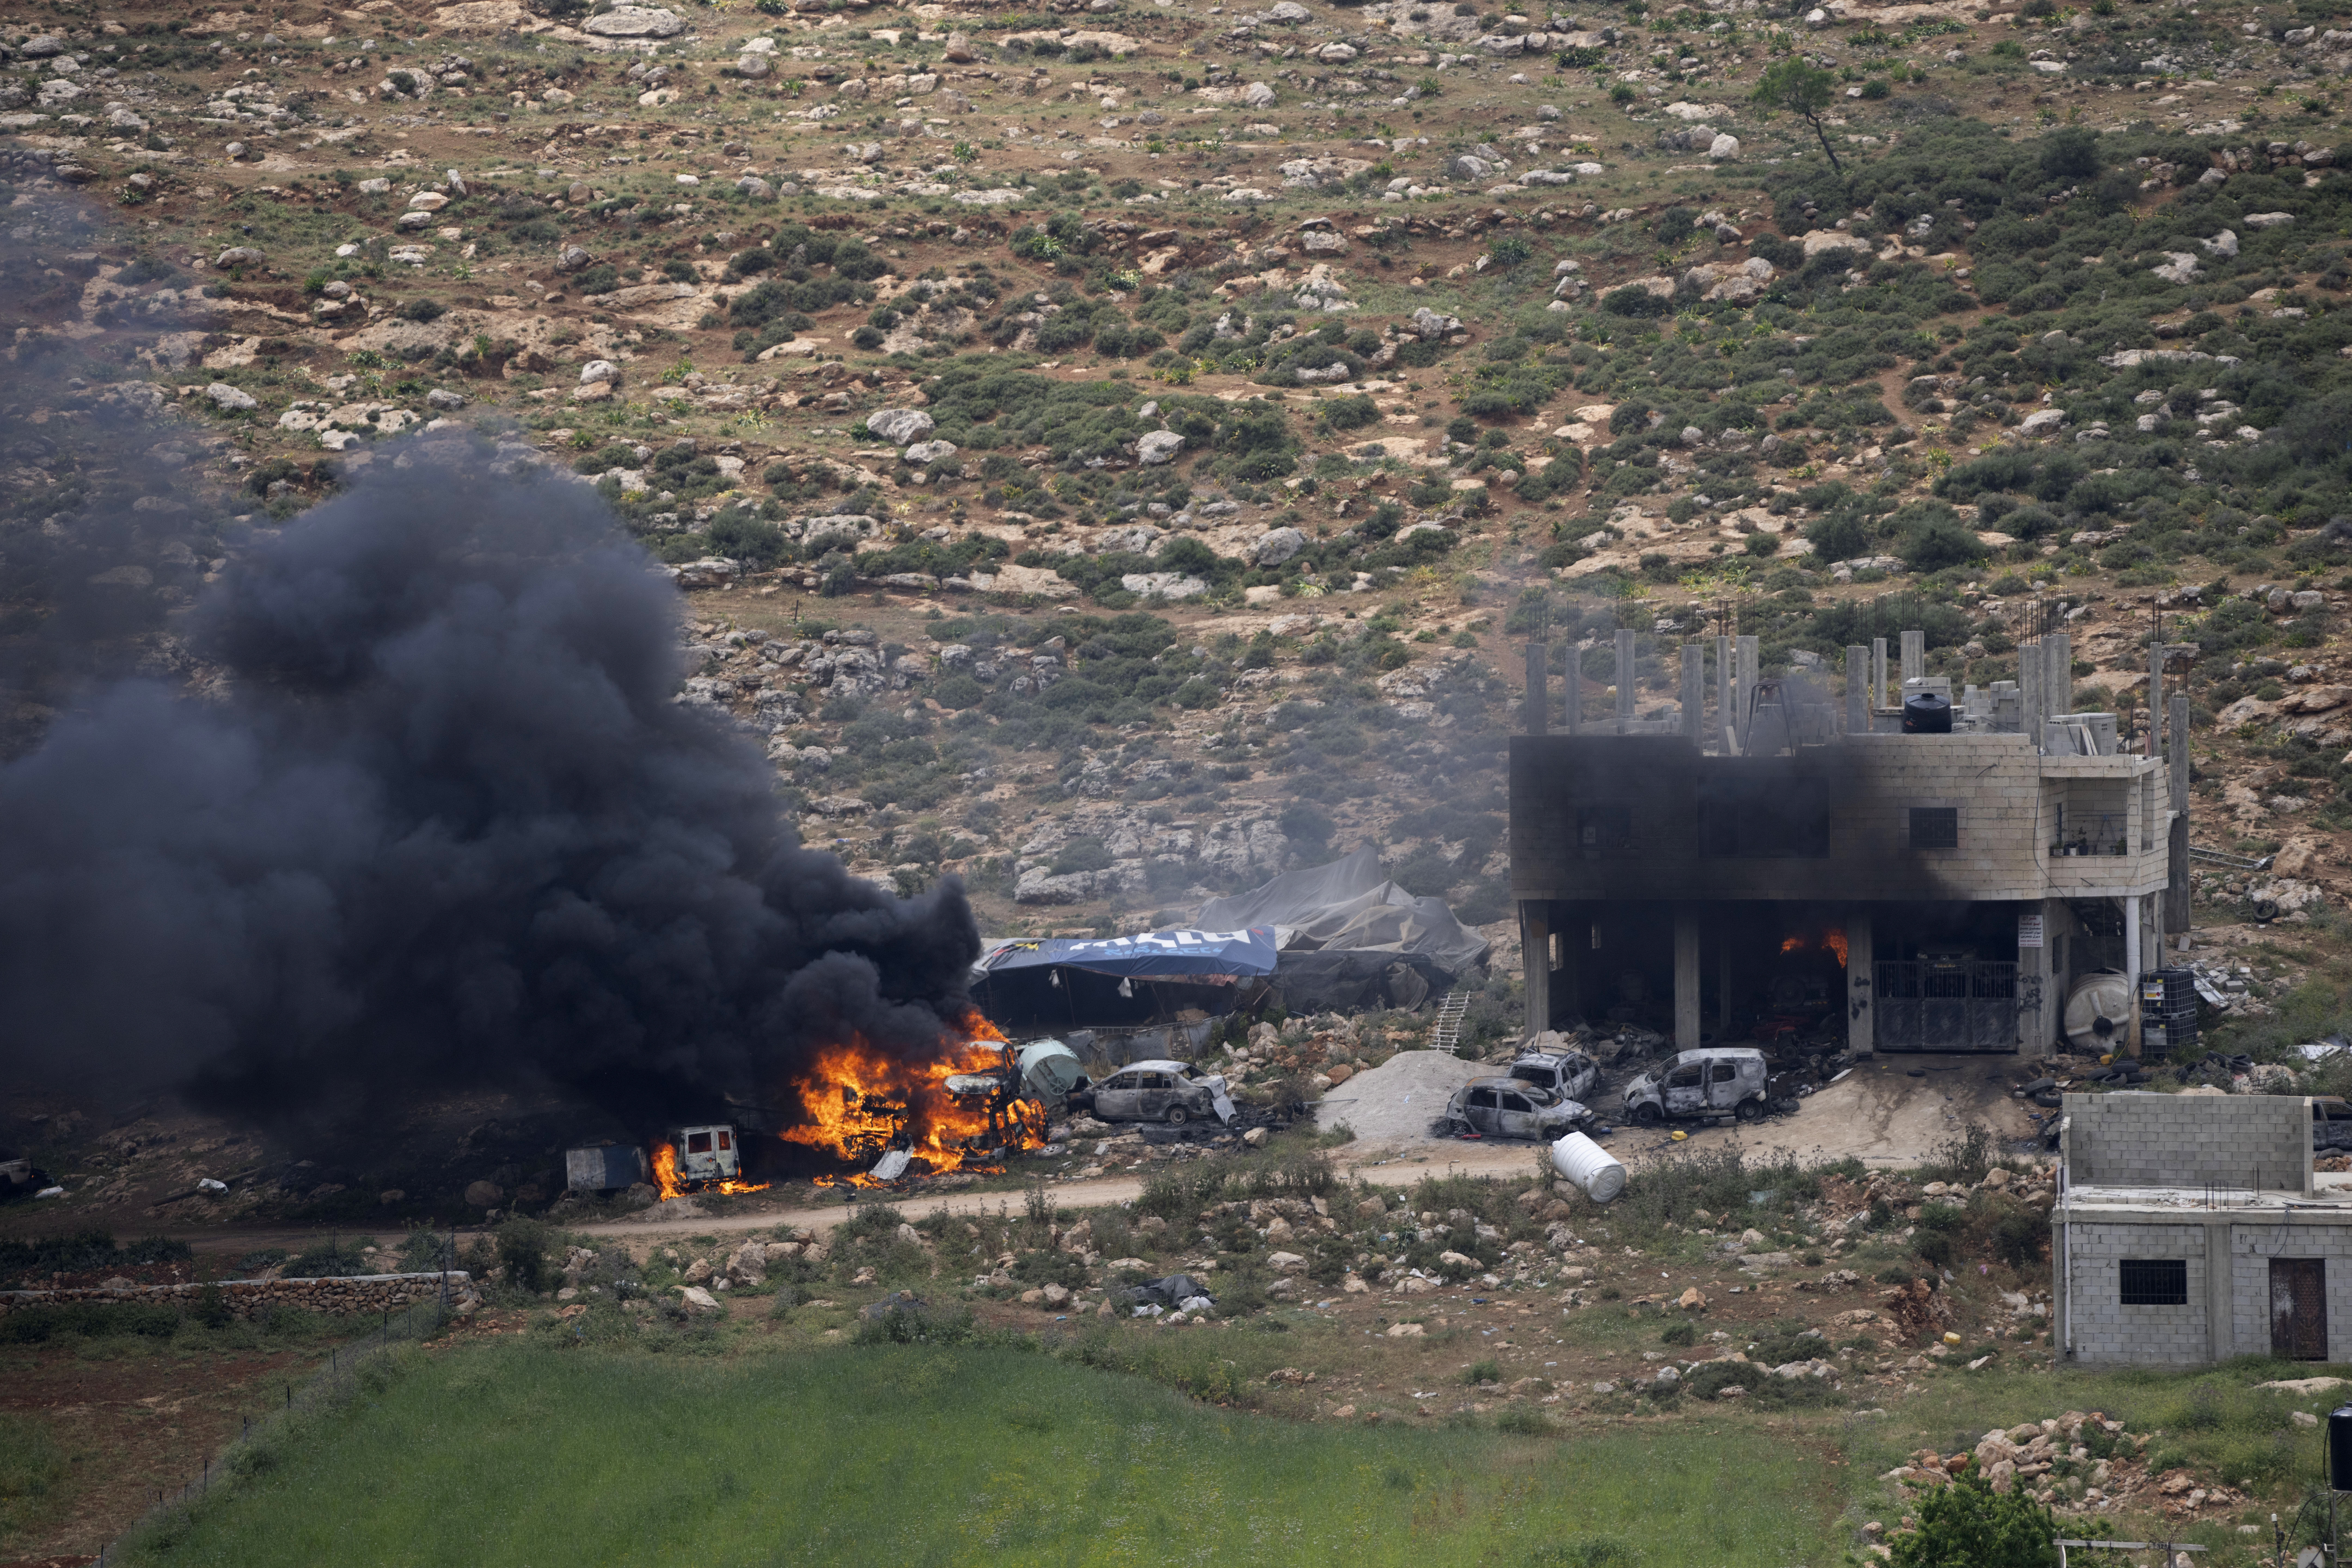 Properties of Palestinian villagers are set on fire by Israeli settlers in the West Bank village of Al-Mughayyir on April 13.